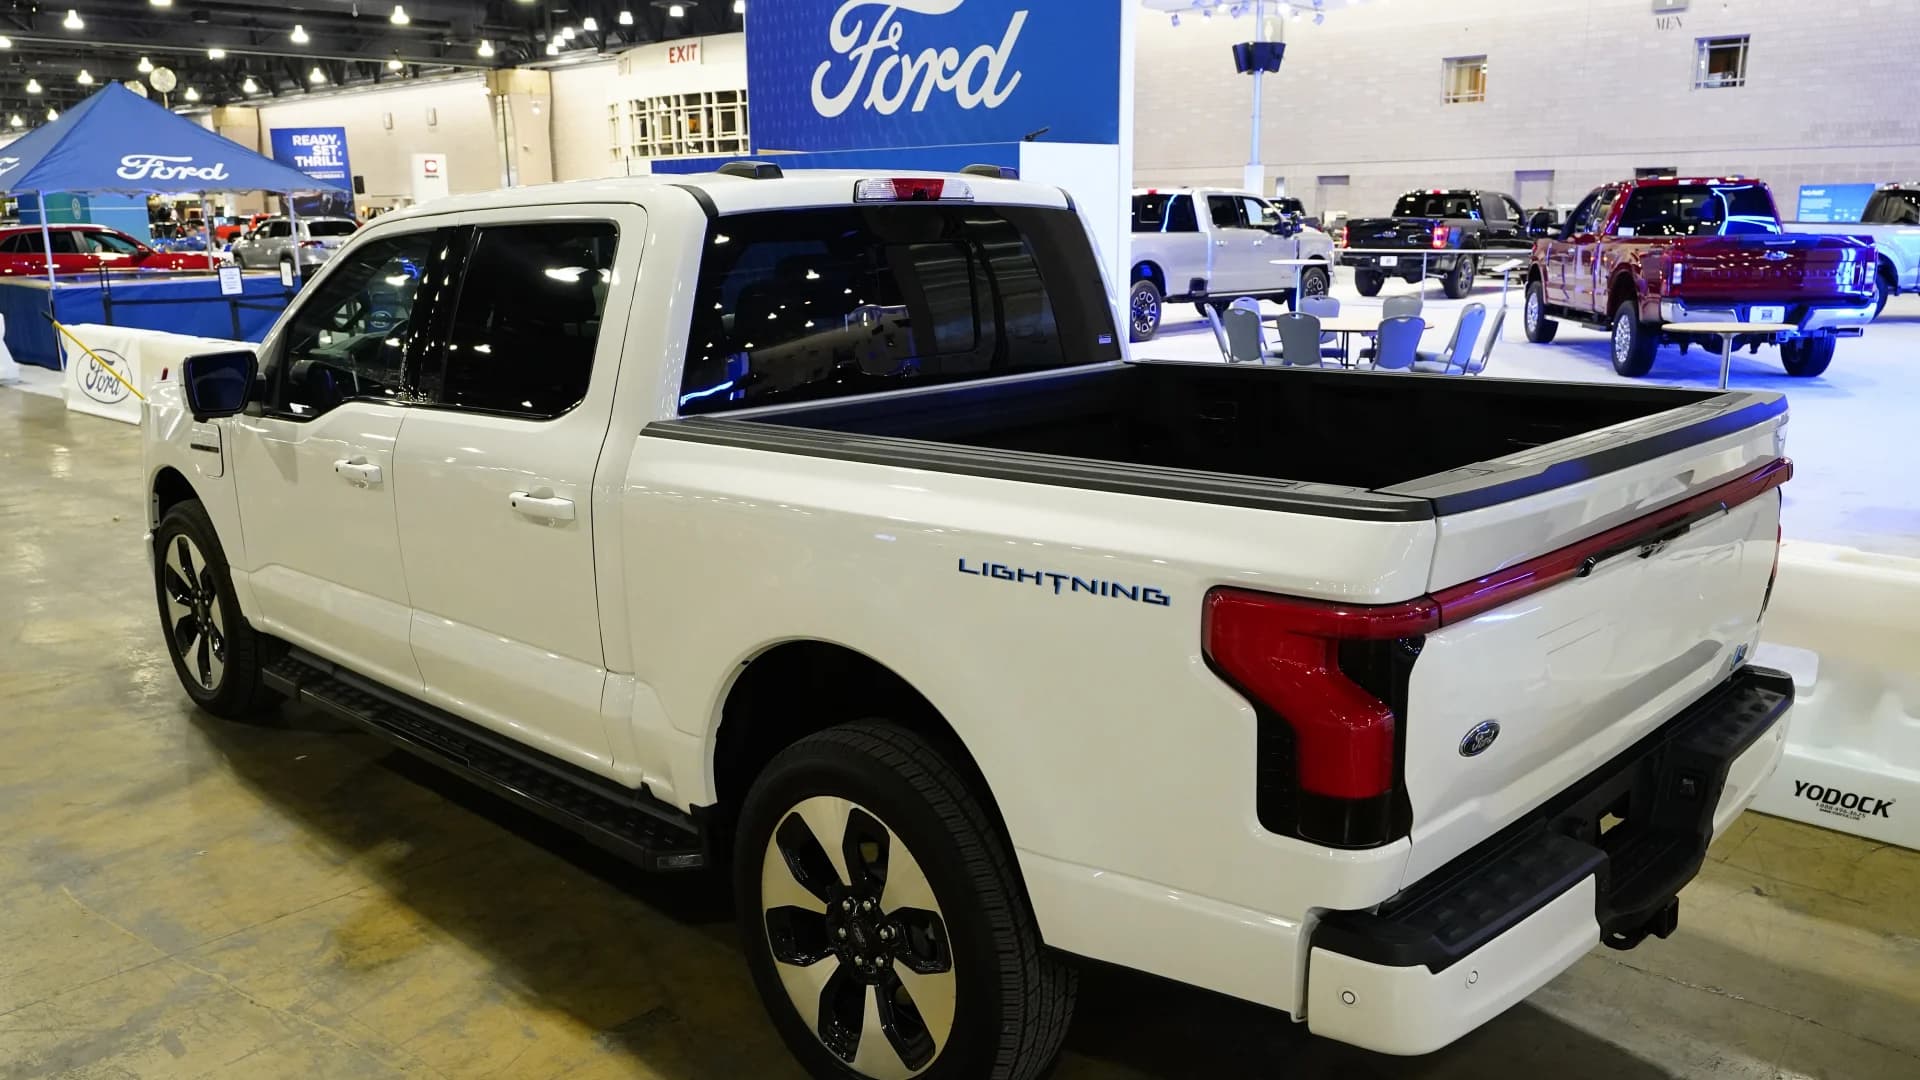 Ford recalls 870K F-150 pickups in US because parking brakes can turn on unexpectedly